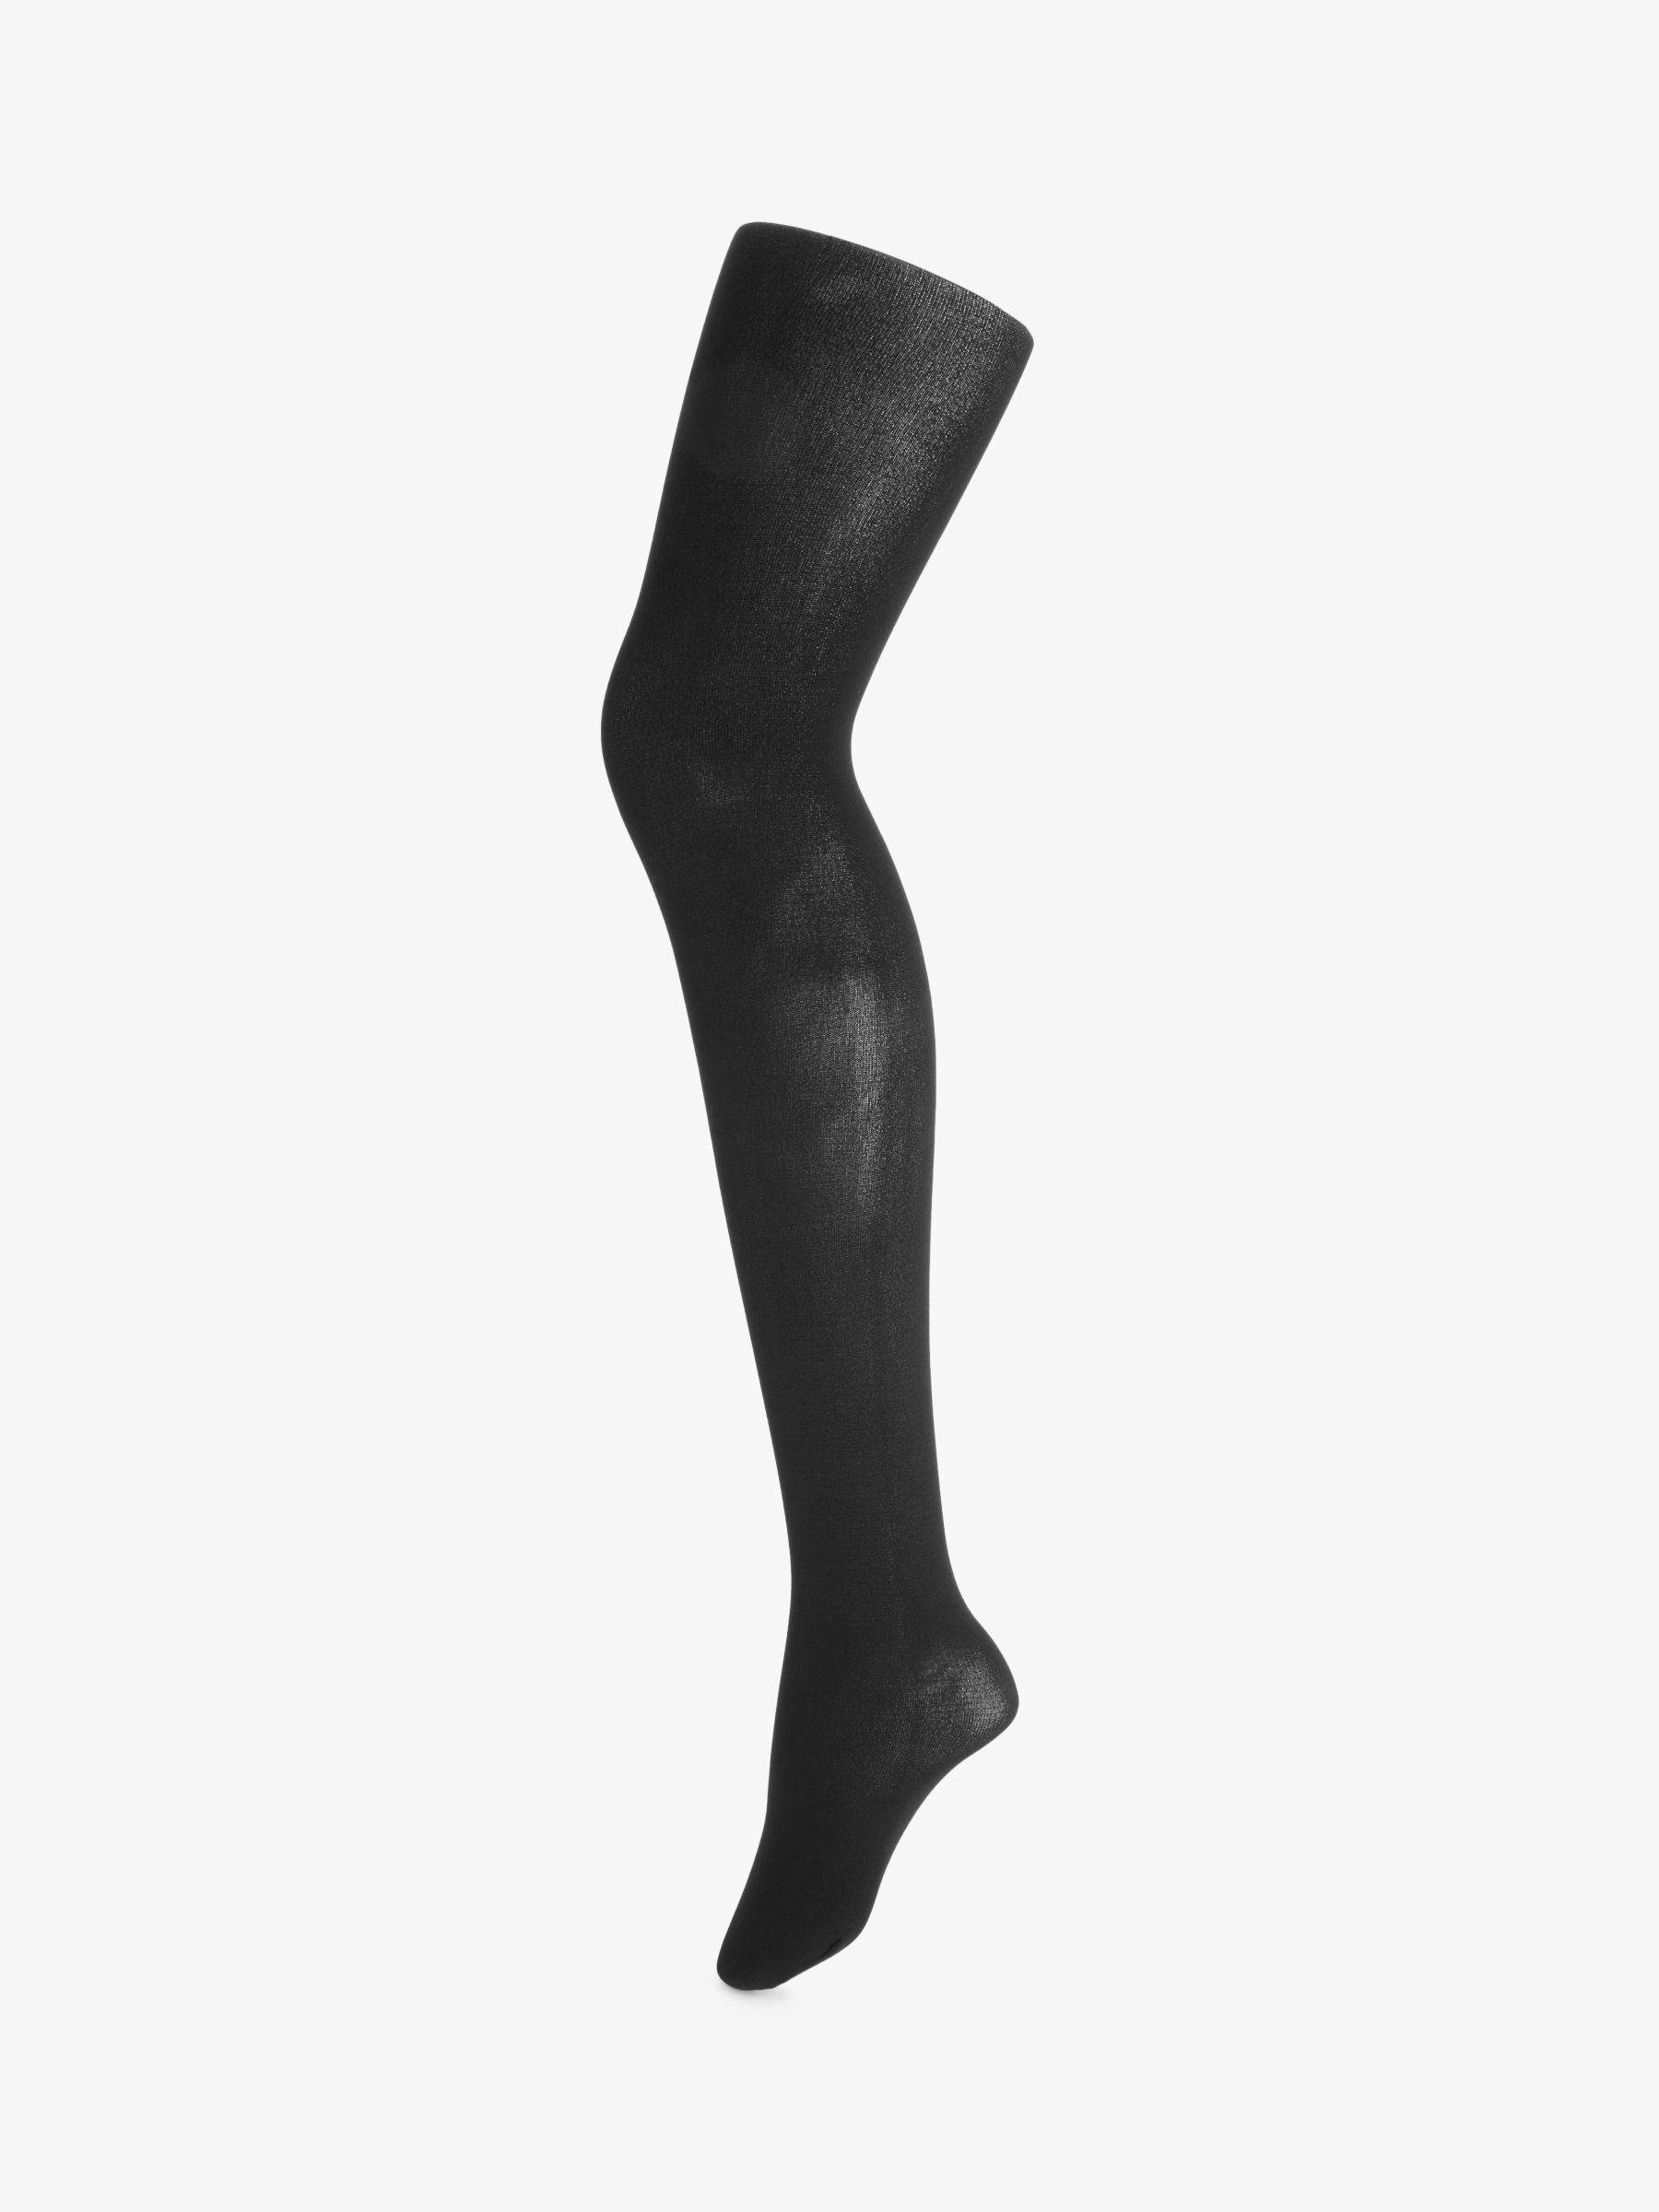 Buy Black Thermal School Tights from the Next UK online shop